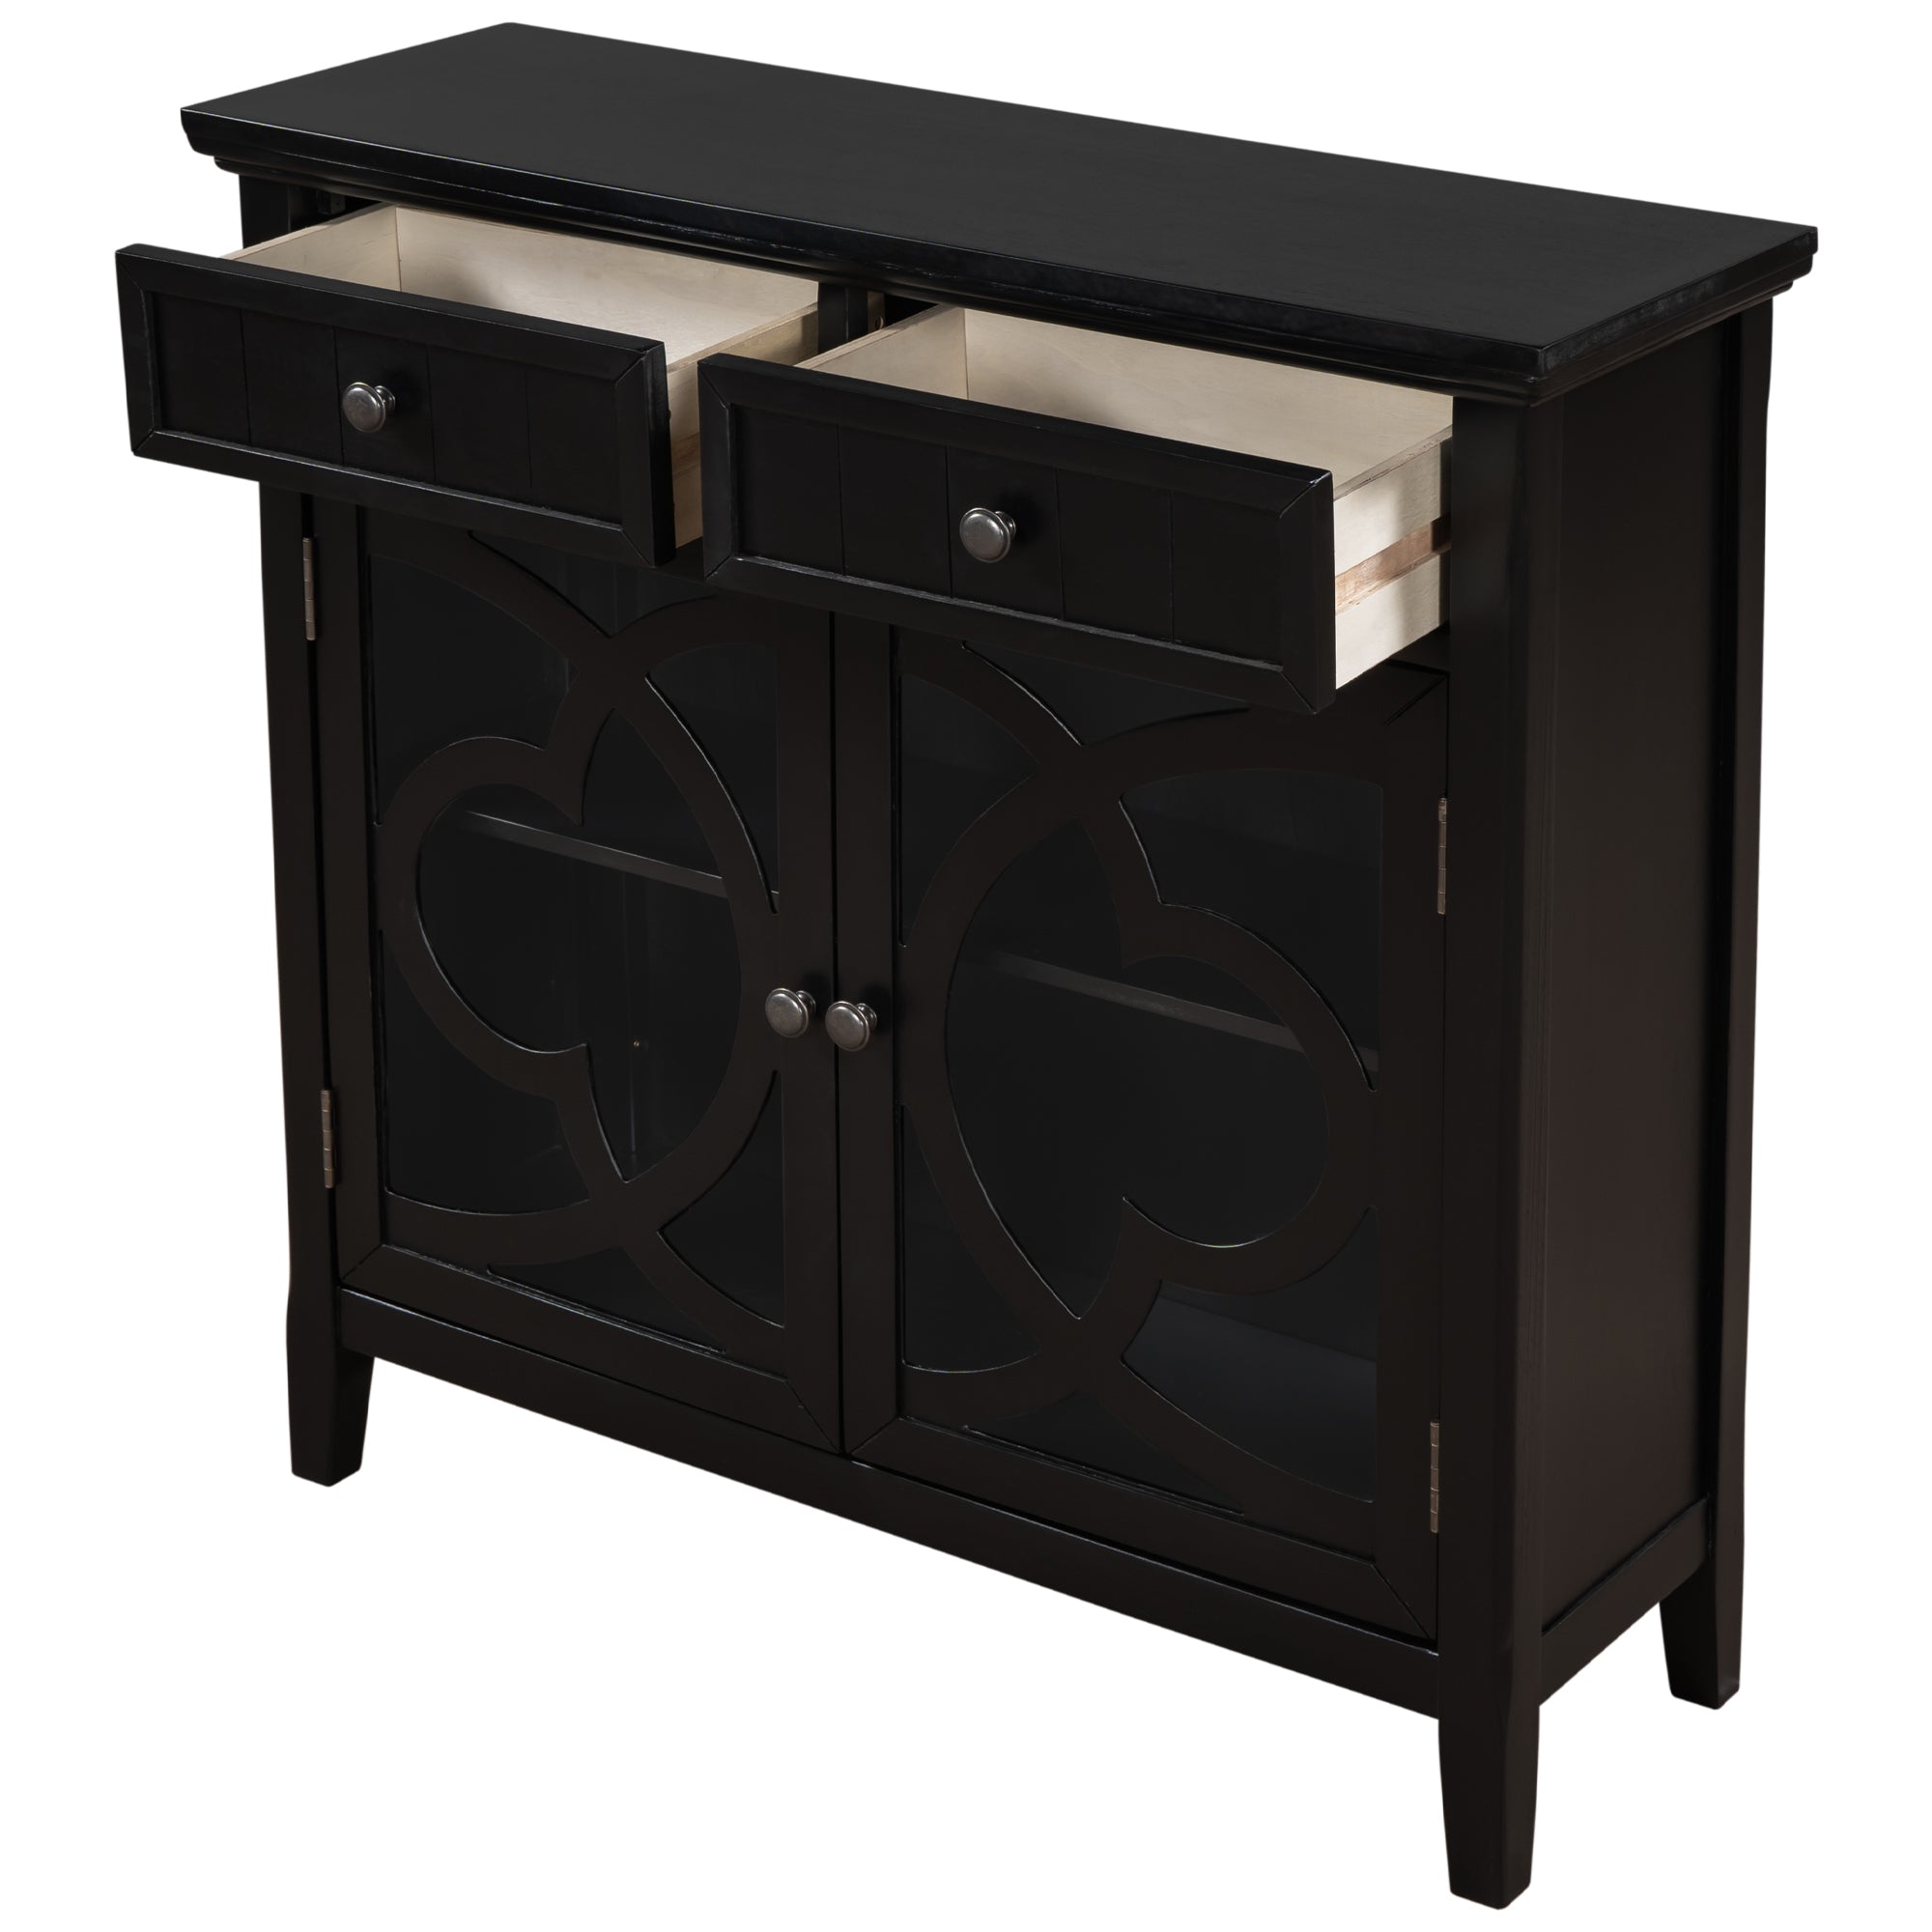 U-style Accent Storage Cabinet Wooden Cabinet with Adjustable Shelf